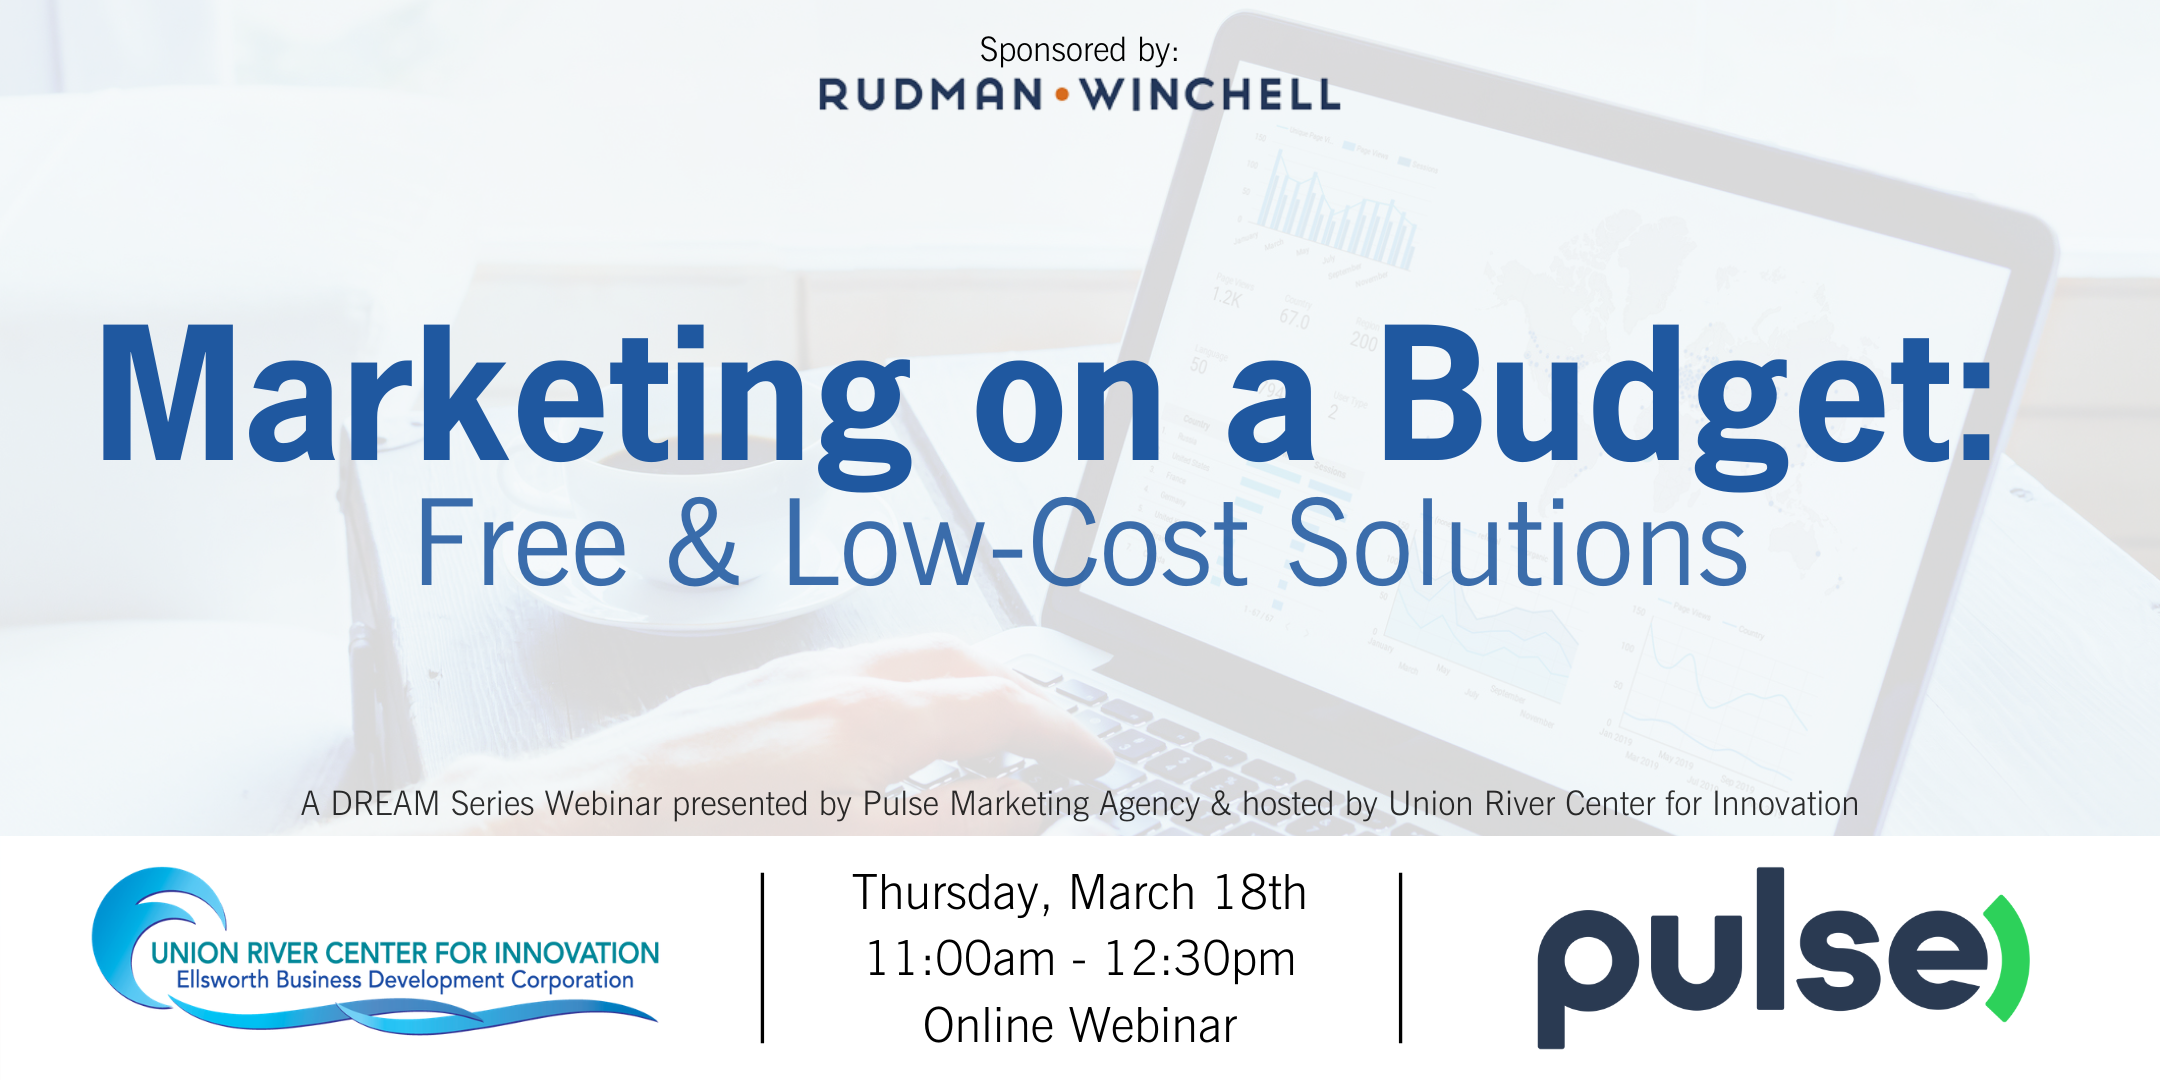 Marketing on a Budget Webinar | Union River Center for Innovation Events